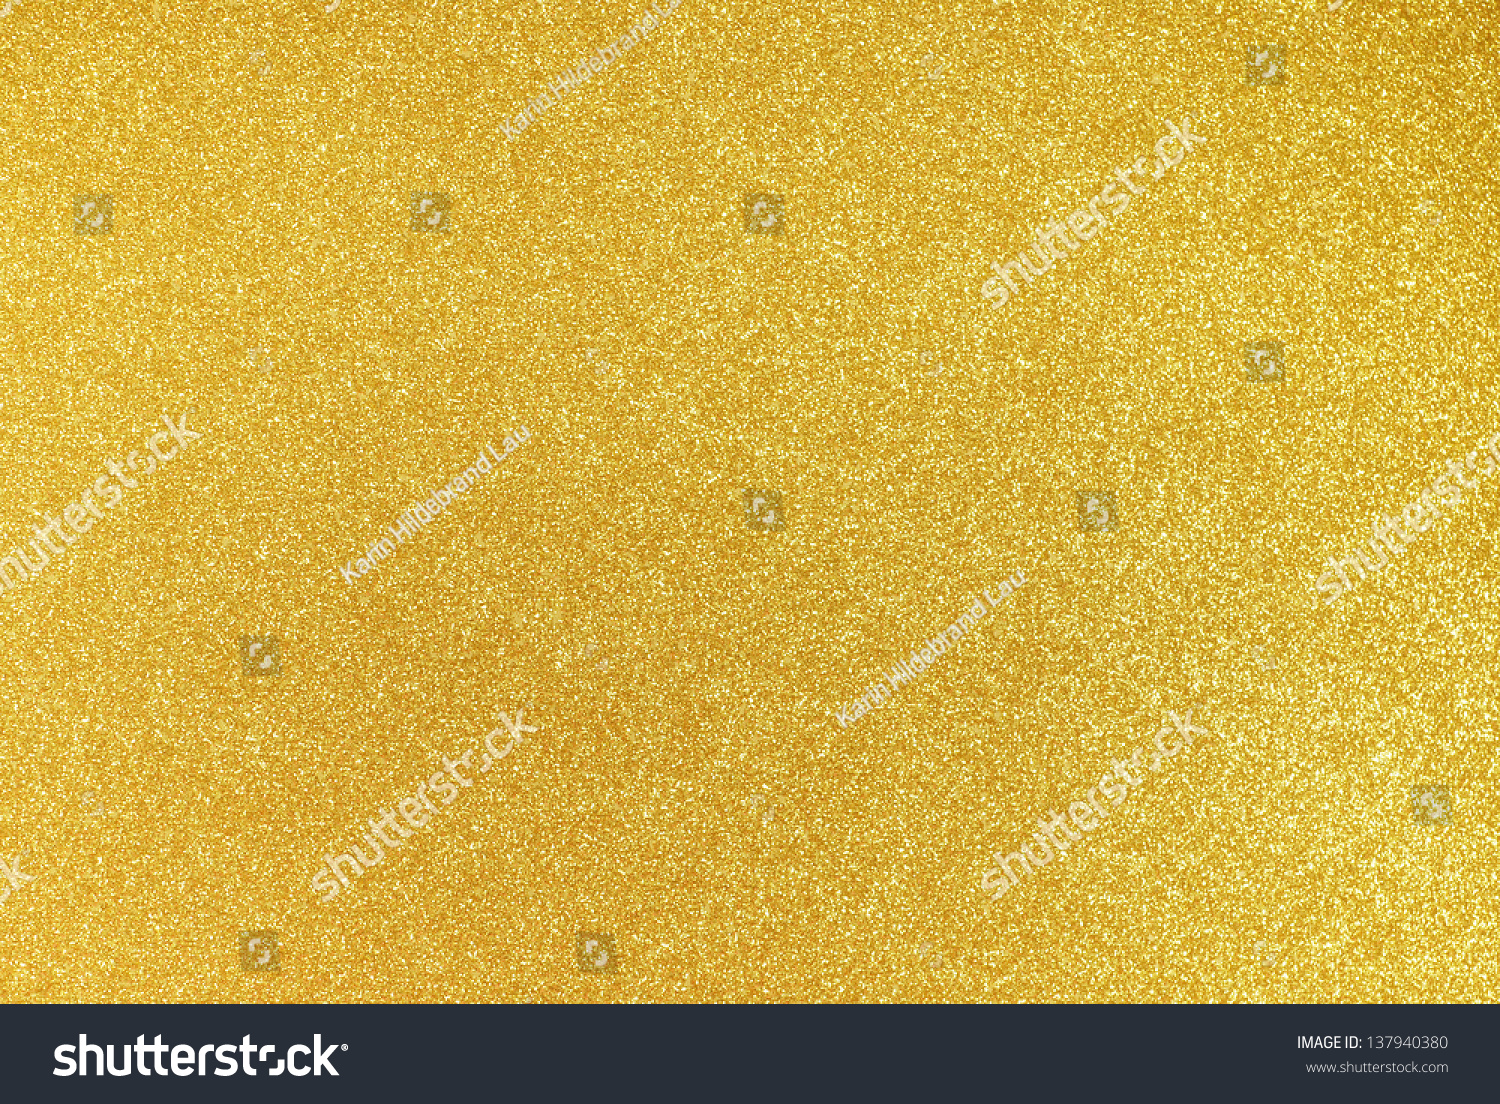 Background filled with shiny gold glitter #137940380